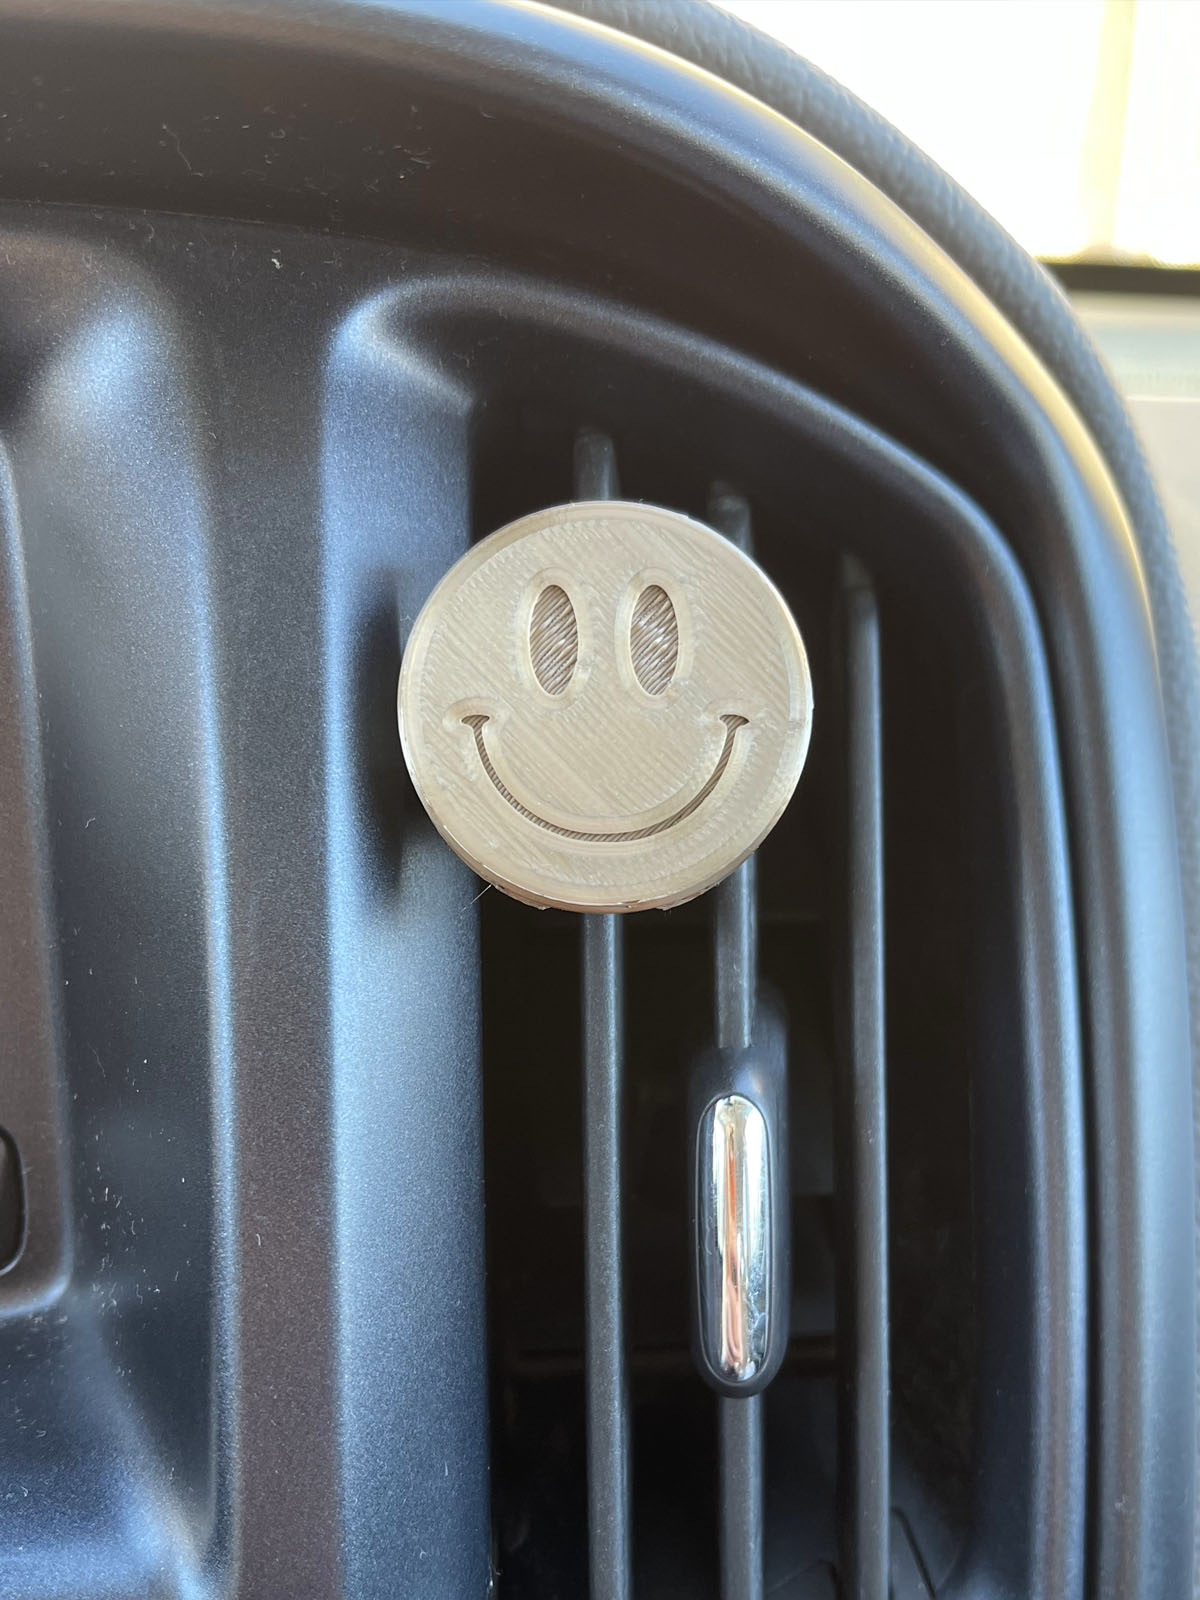 Smiley Face Car Character Clip - Vent Decor / Holder